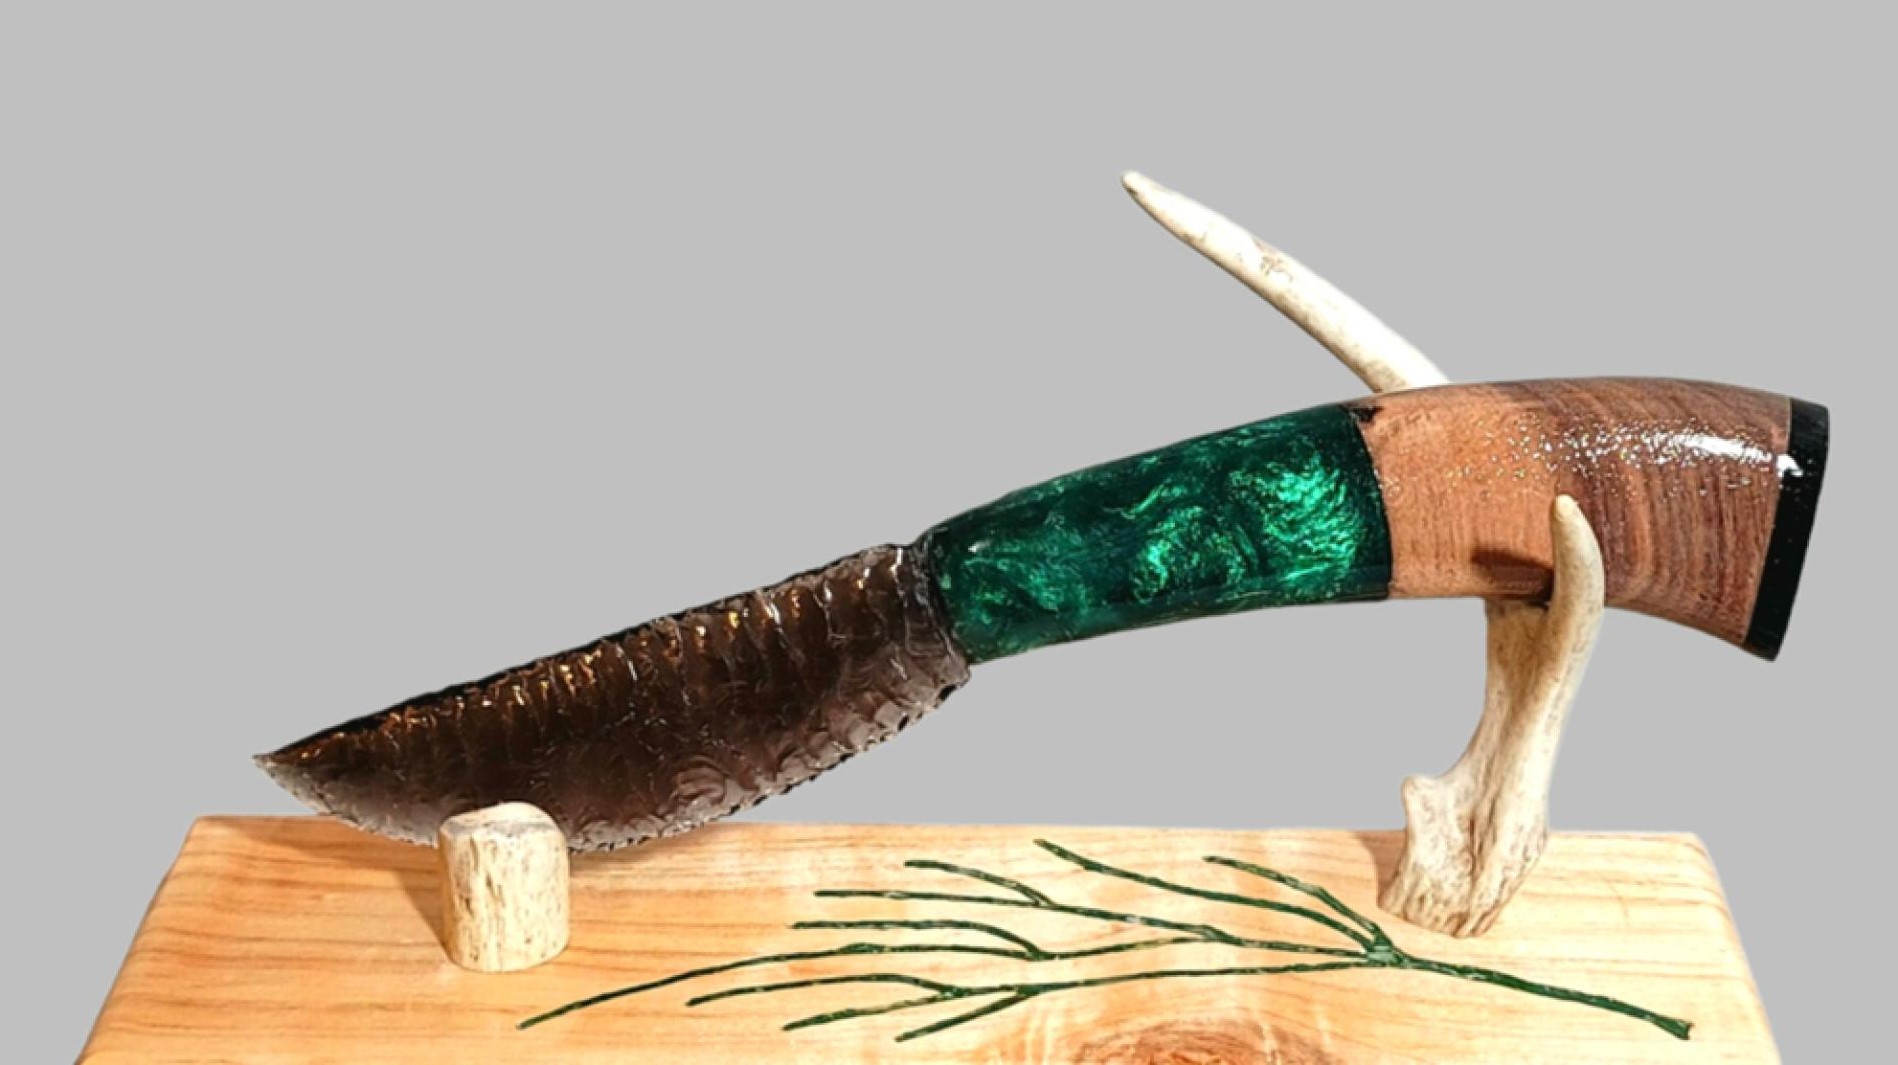 Photograph of an obsidian blade knife with a green handle on a stand made of wood and antlers.